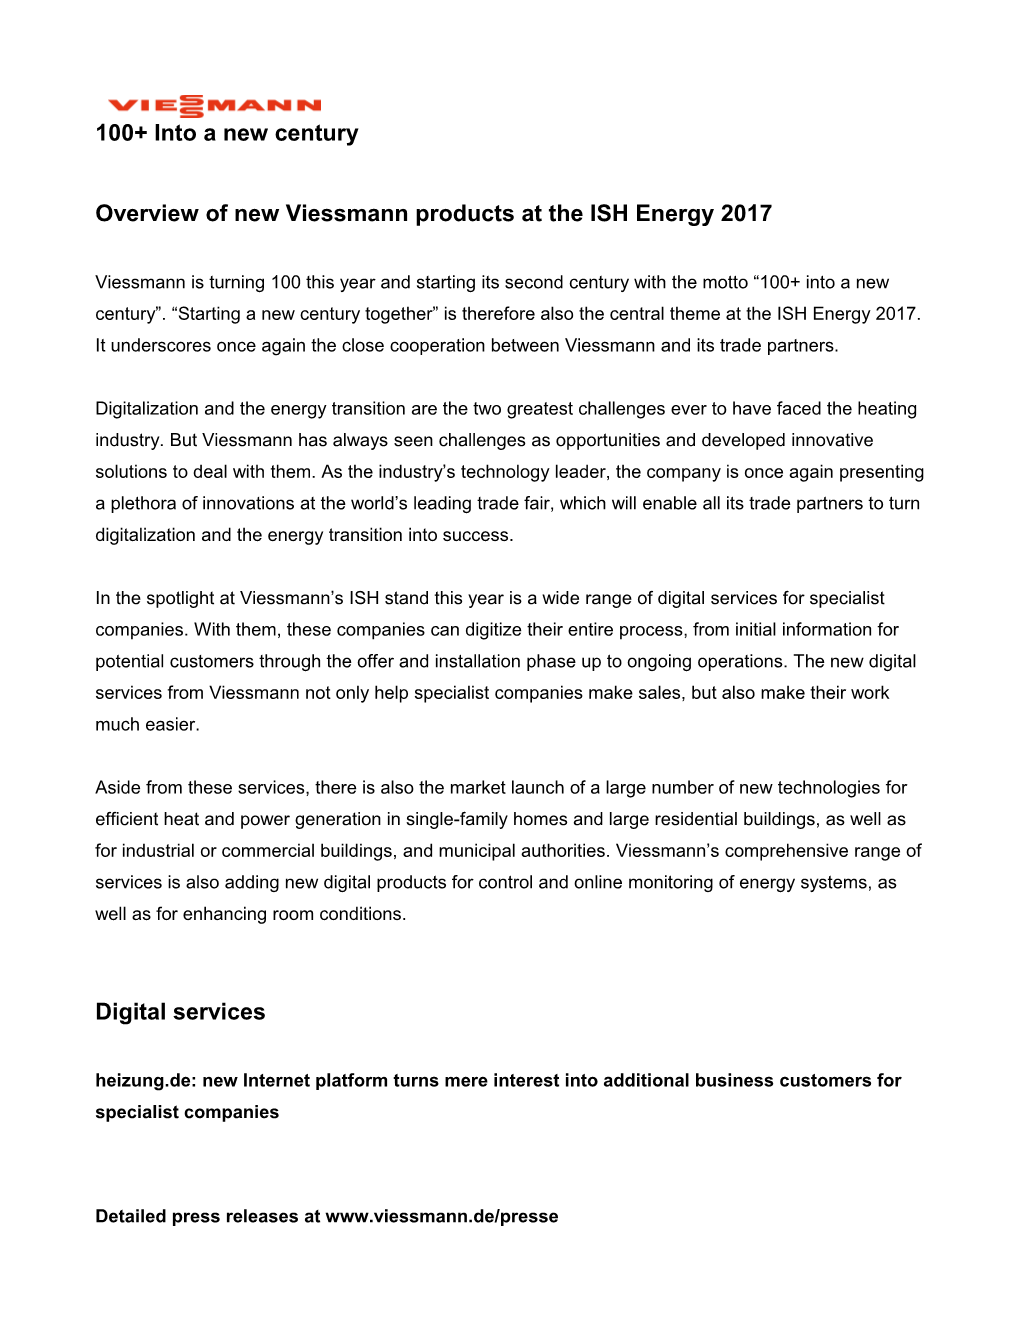 Overview of New Viessmann Products at the ISH Energy 2017